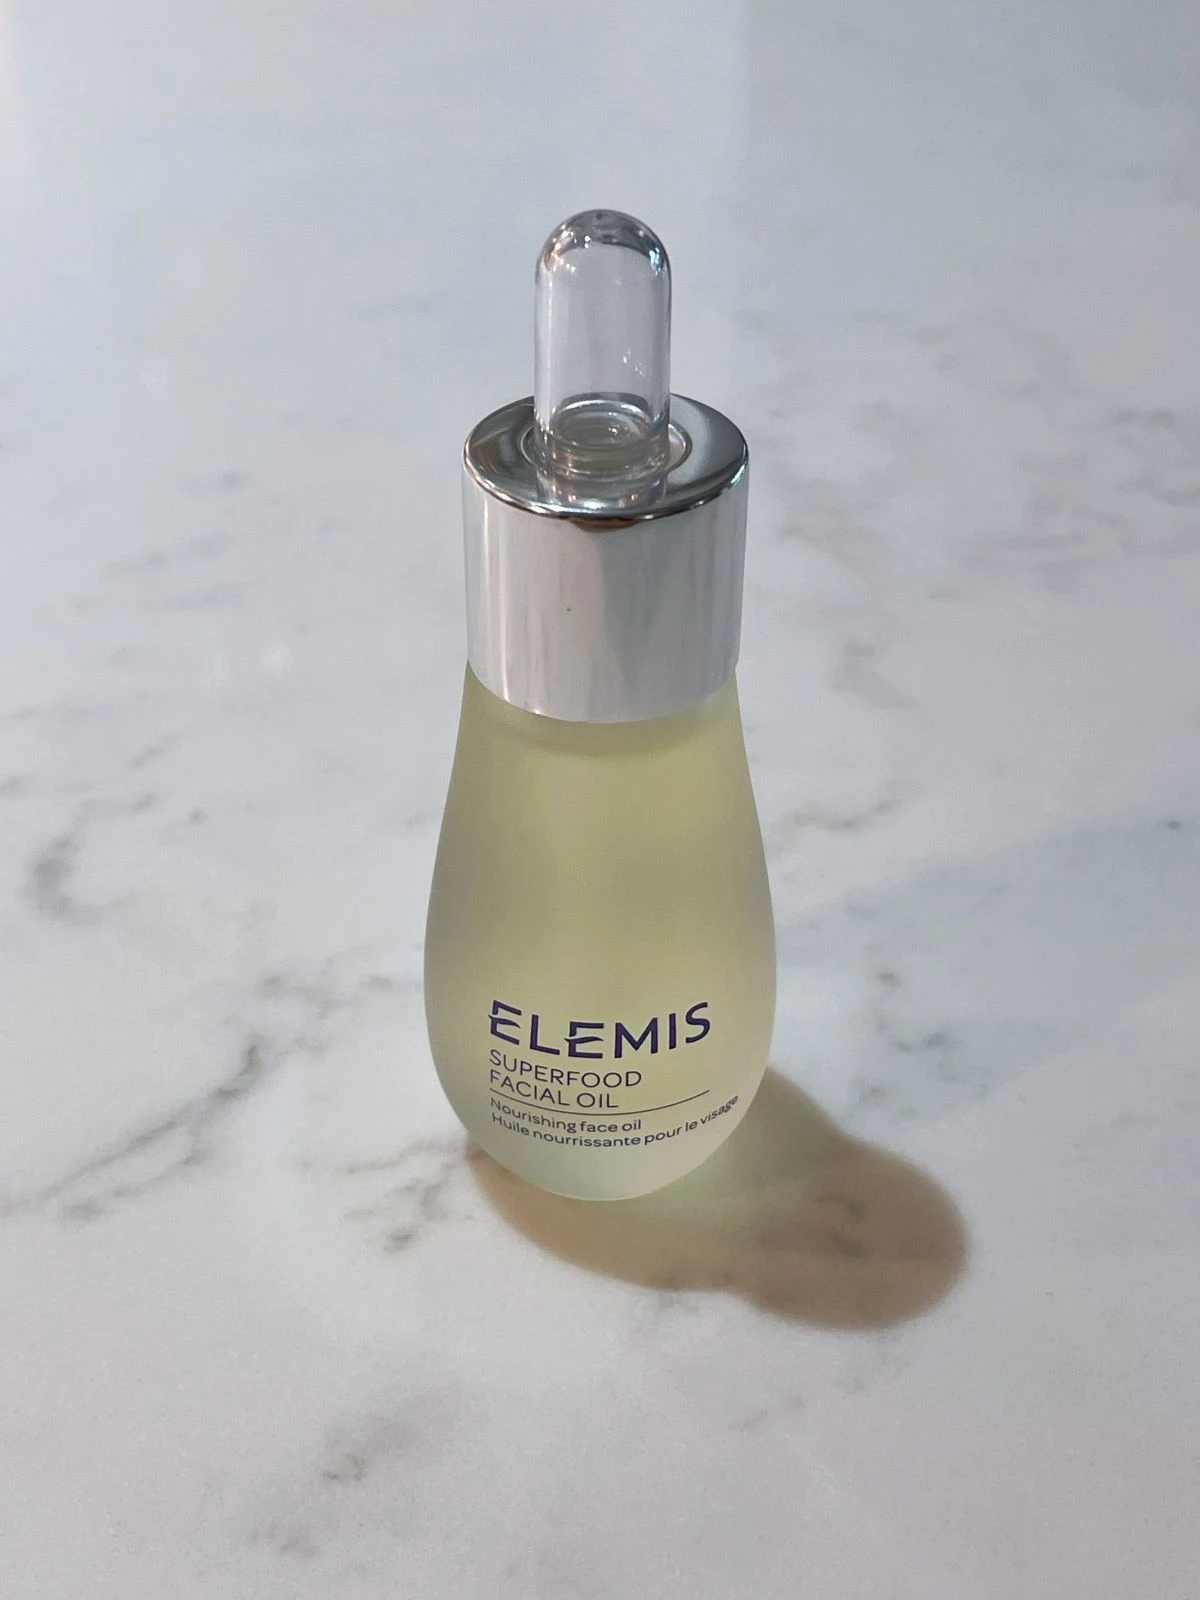 Elemis Superfood Facial Oil 15ml - luxury skincare blog review